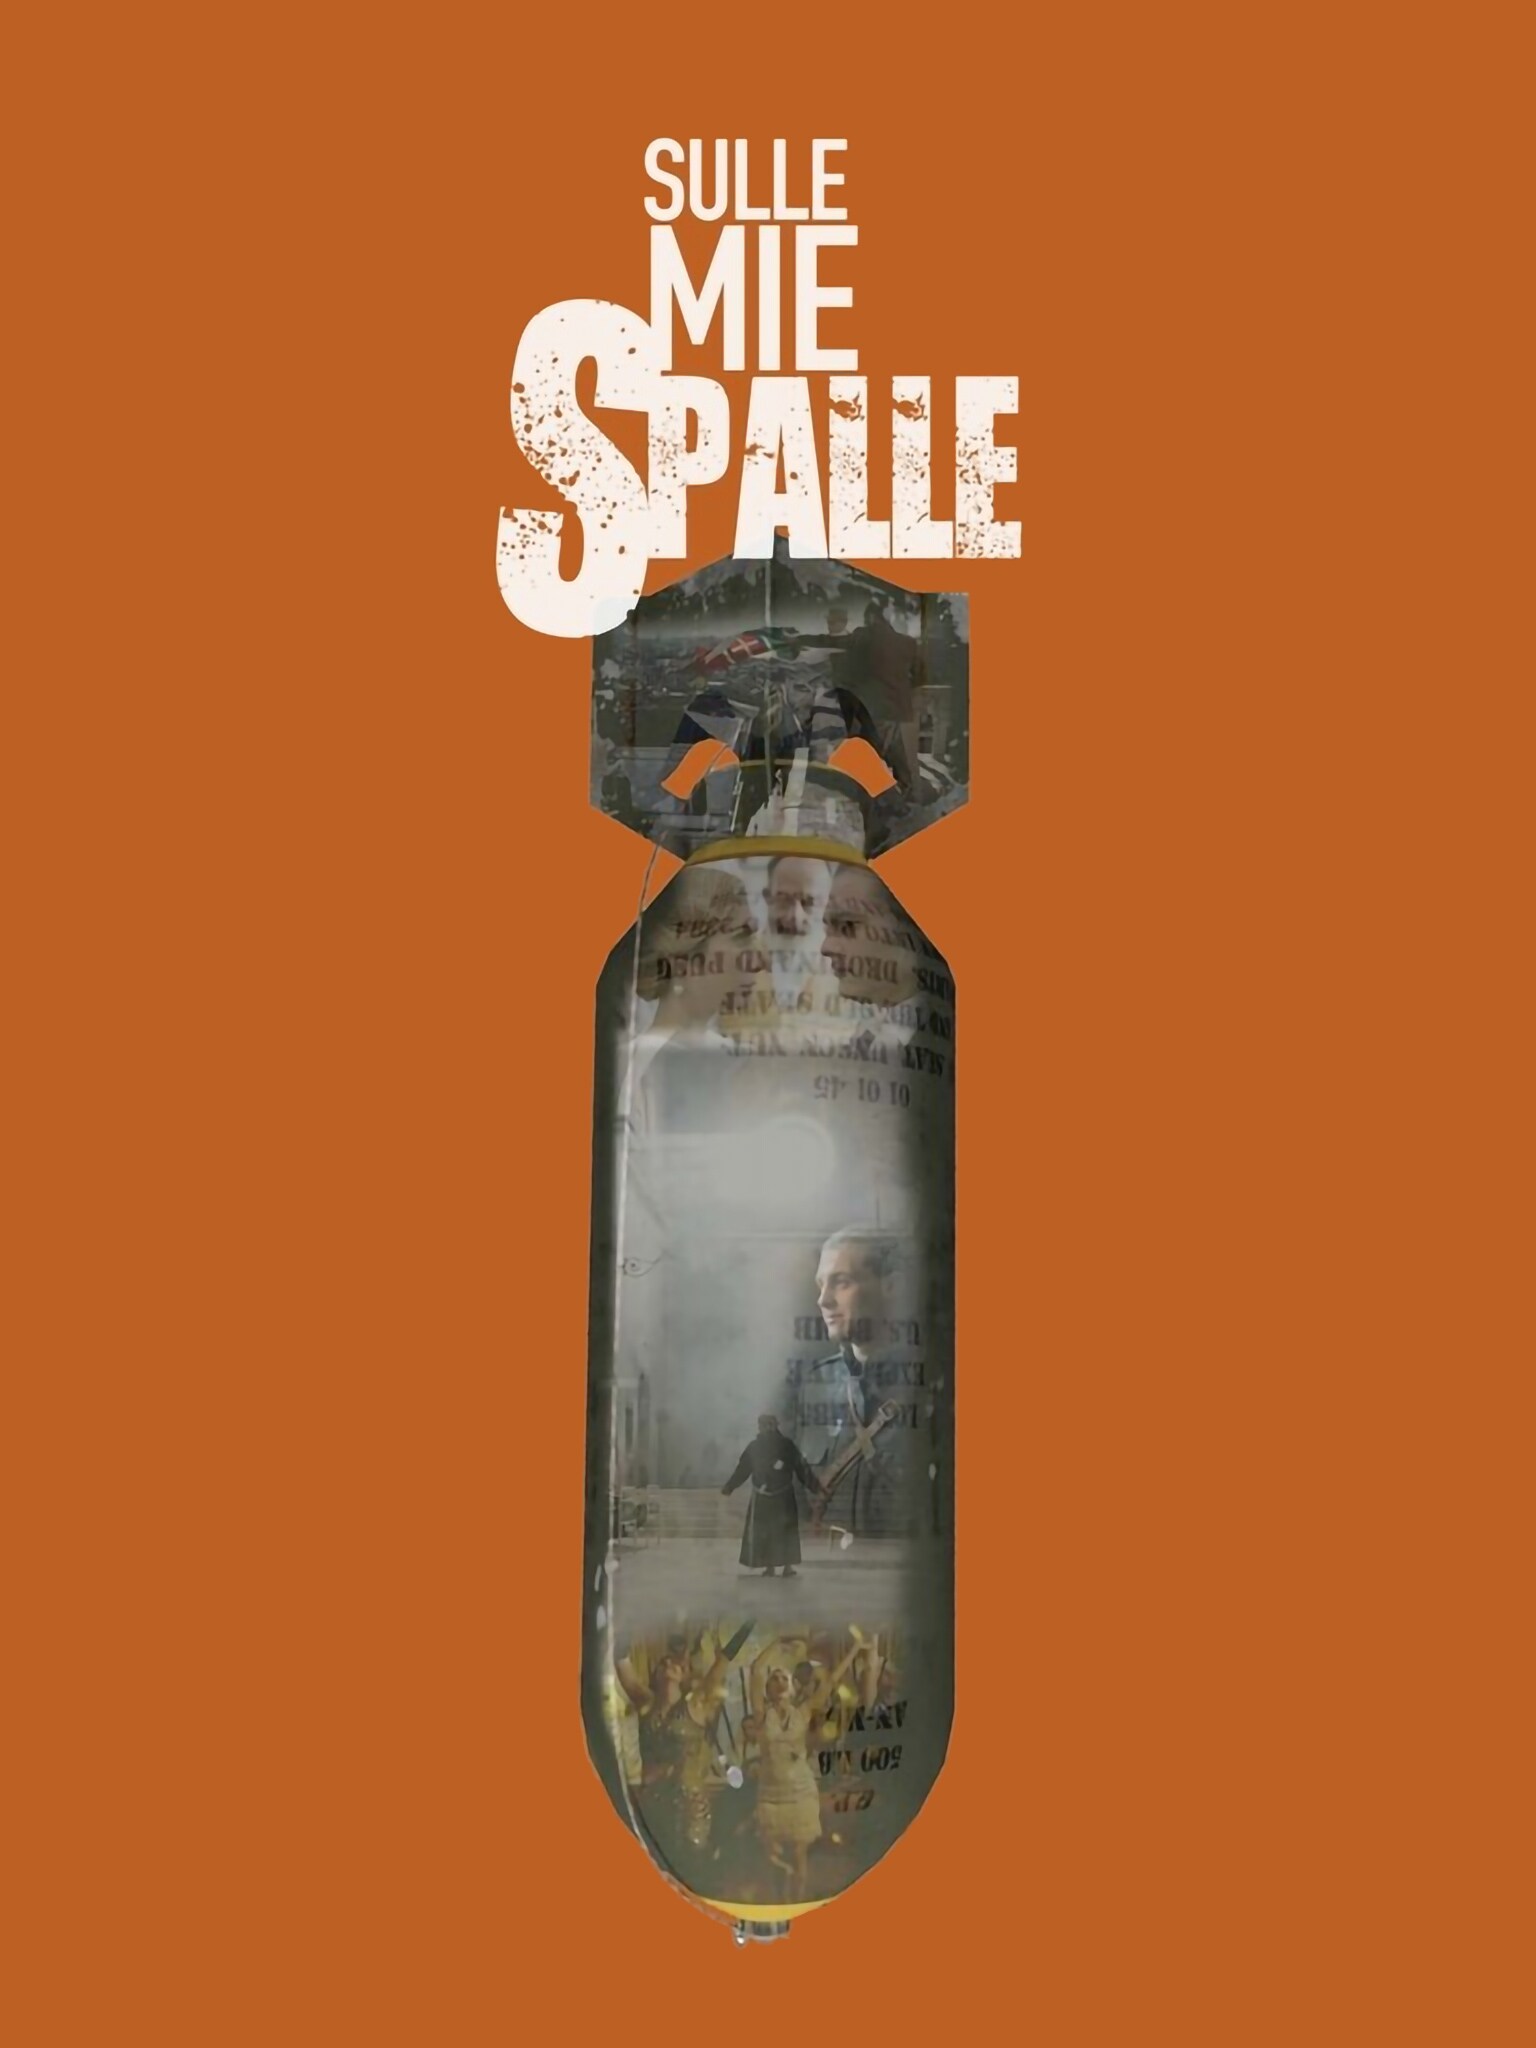 Sulle mie spalle [HD] (2020)